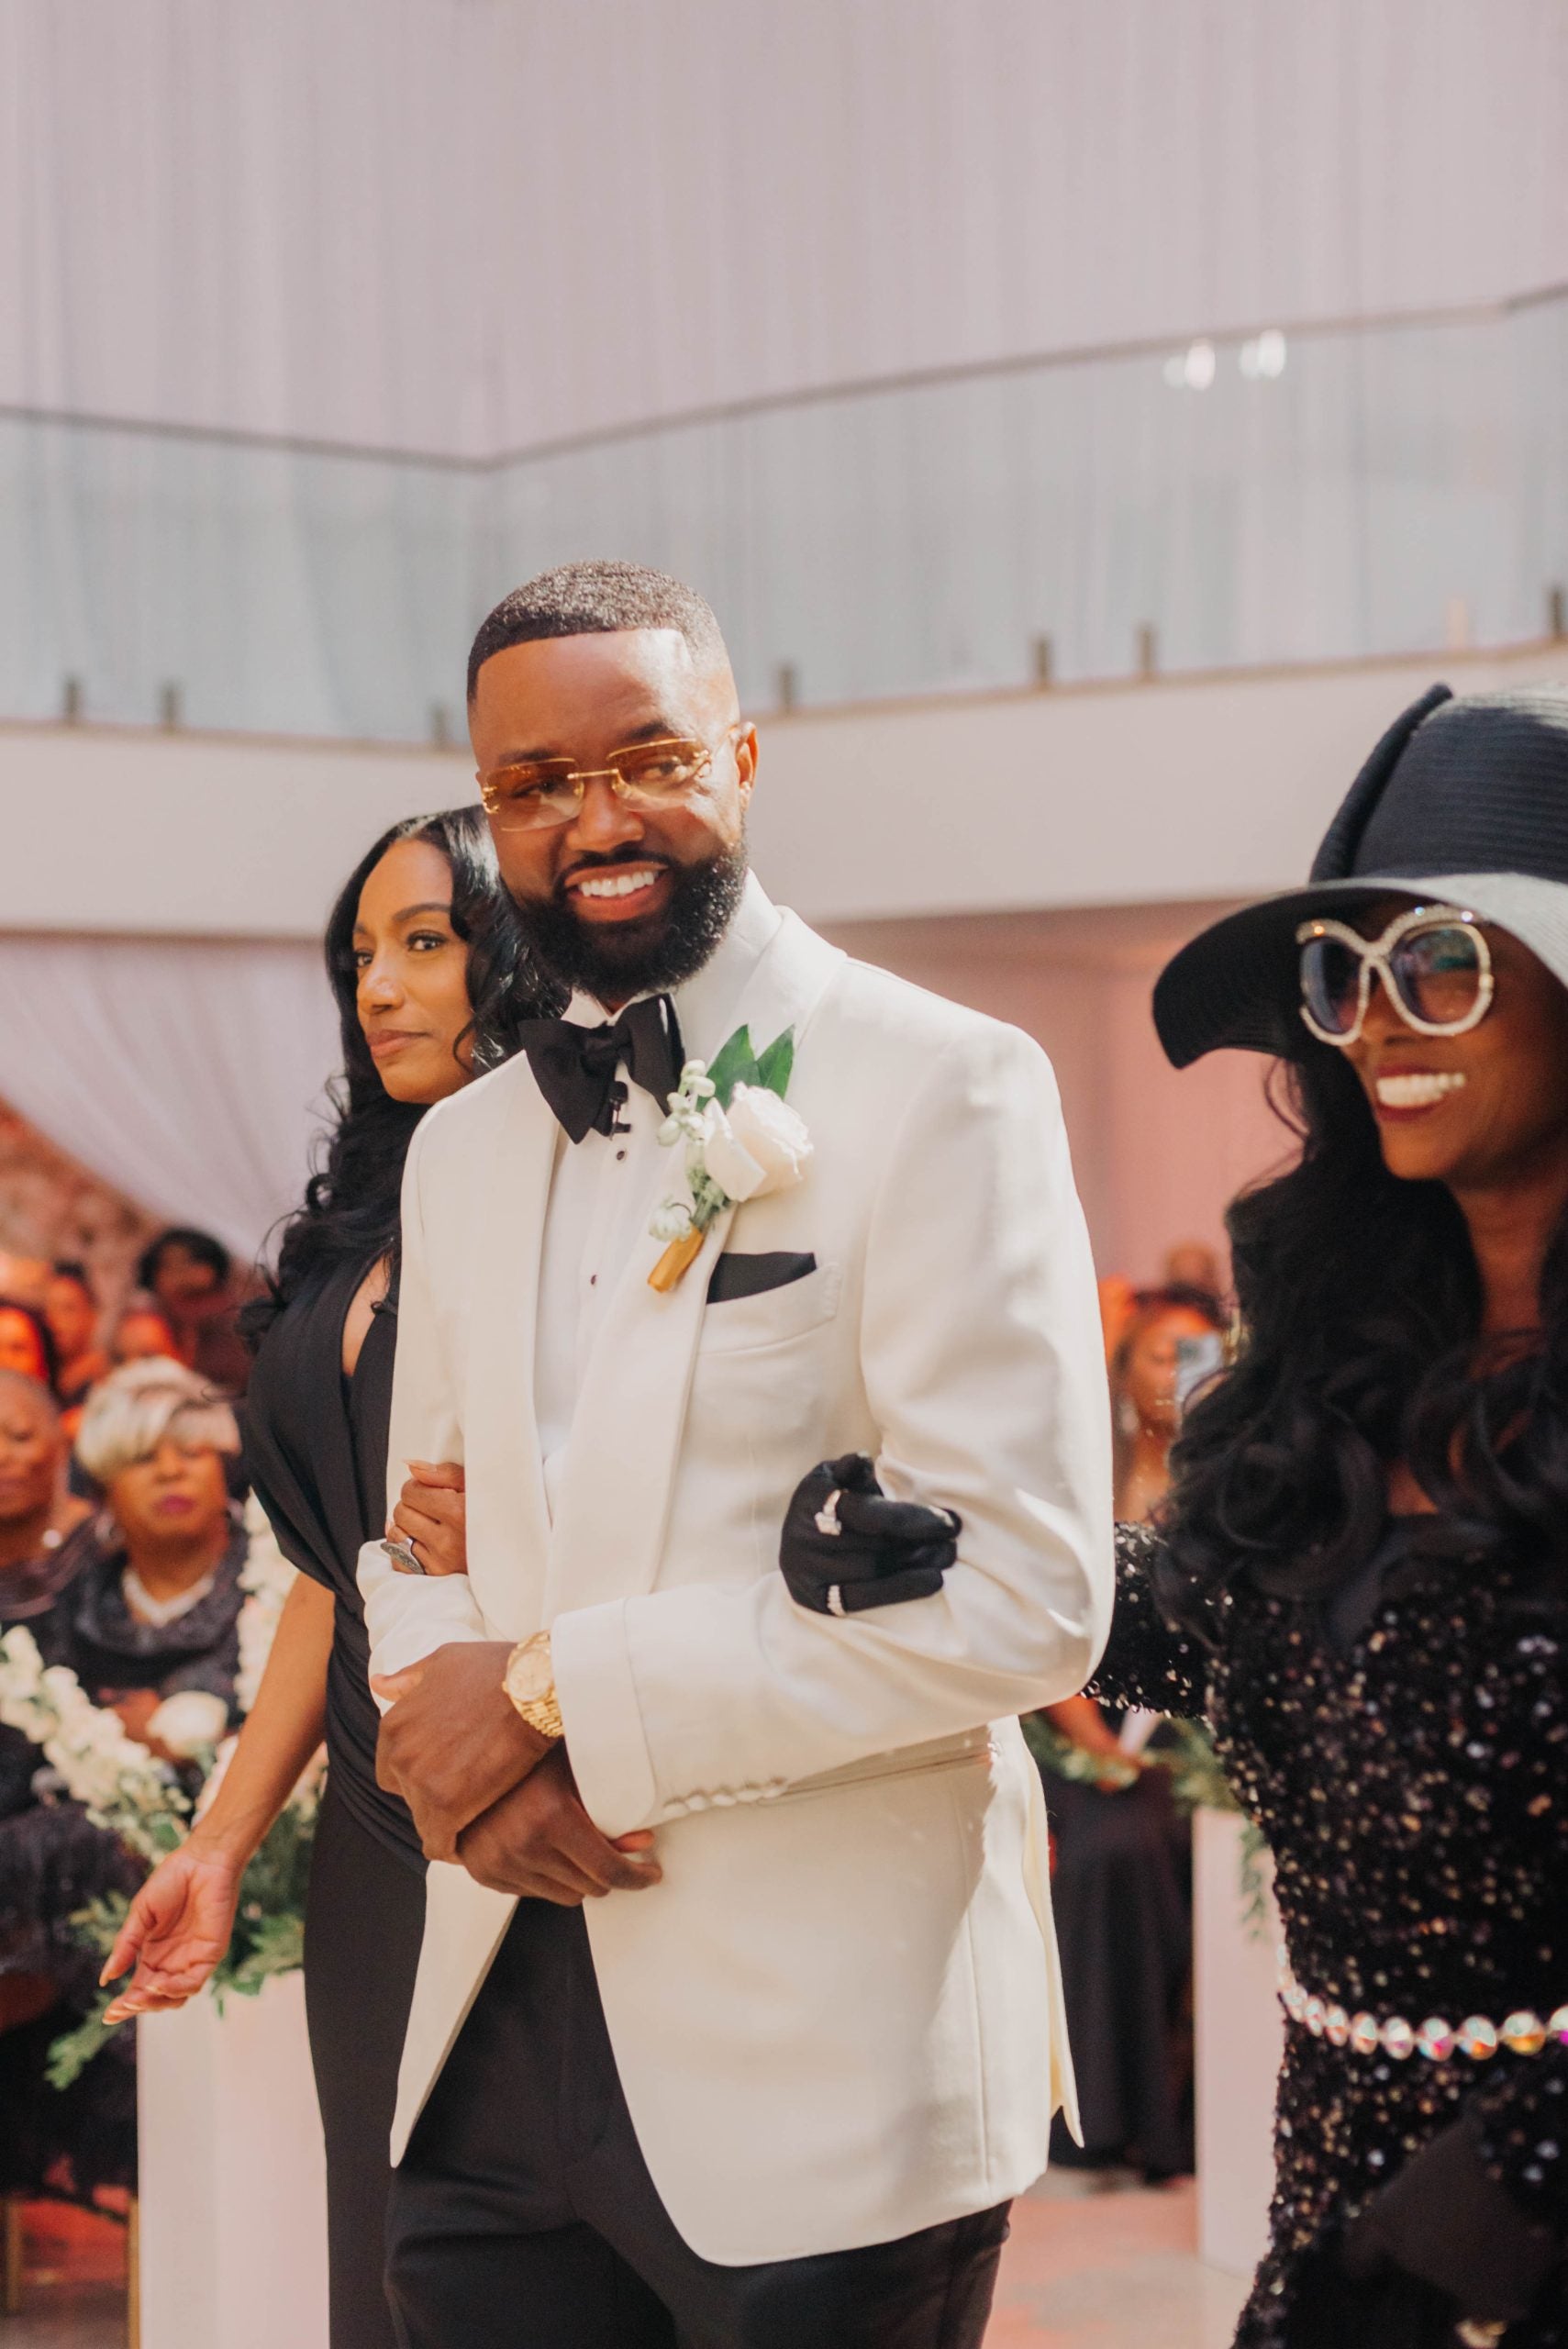 Bridal Bliss: Ashley, Daughter Of R&B Greats Terry Lewis And Karyn White, Wed J.R. In A Star-Studded Celebration Of Love